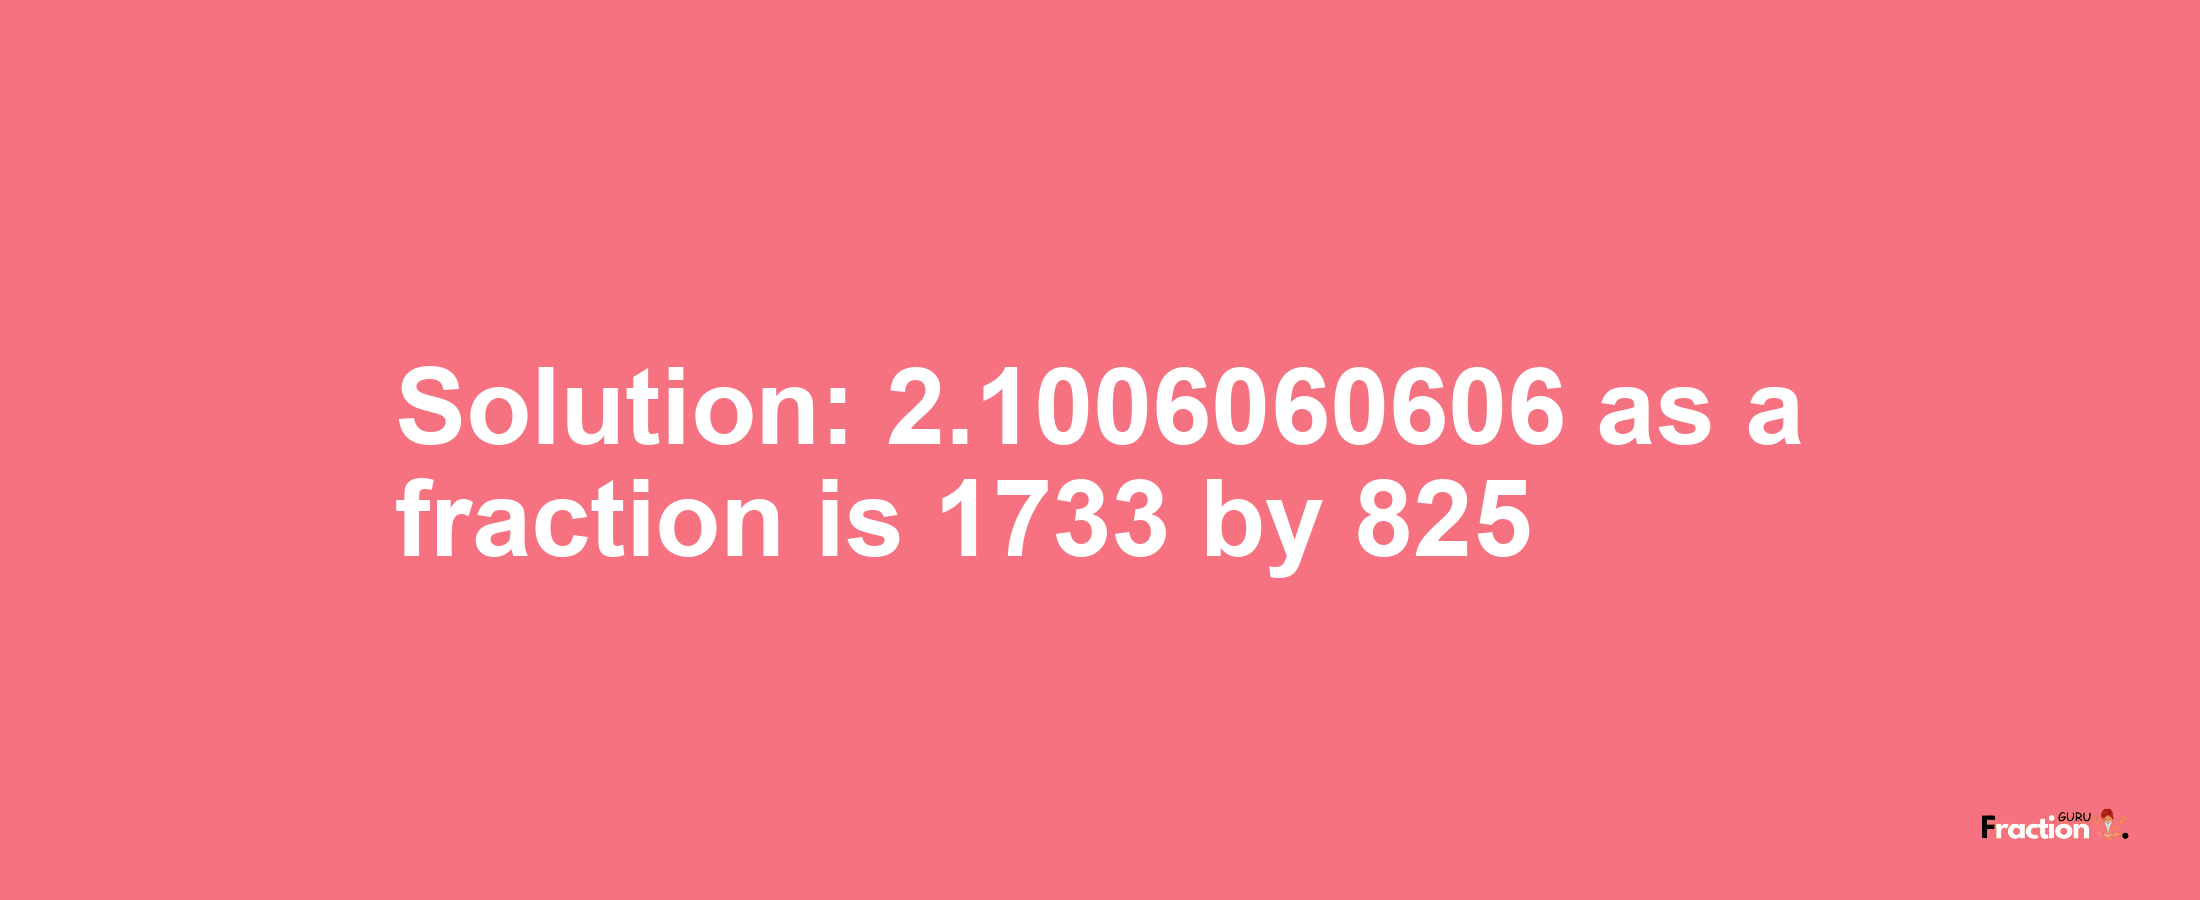 Solution:2.1006060606 as a fraction is 1733/825